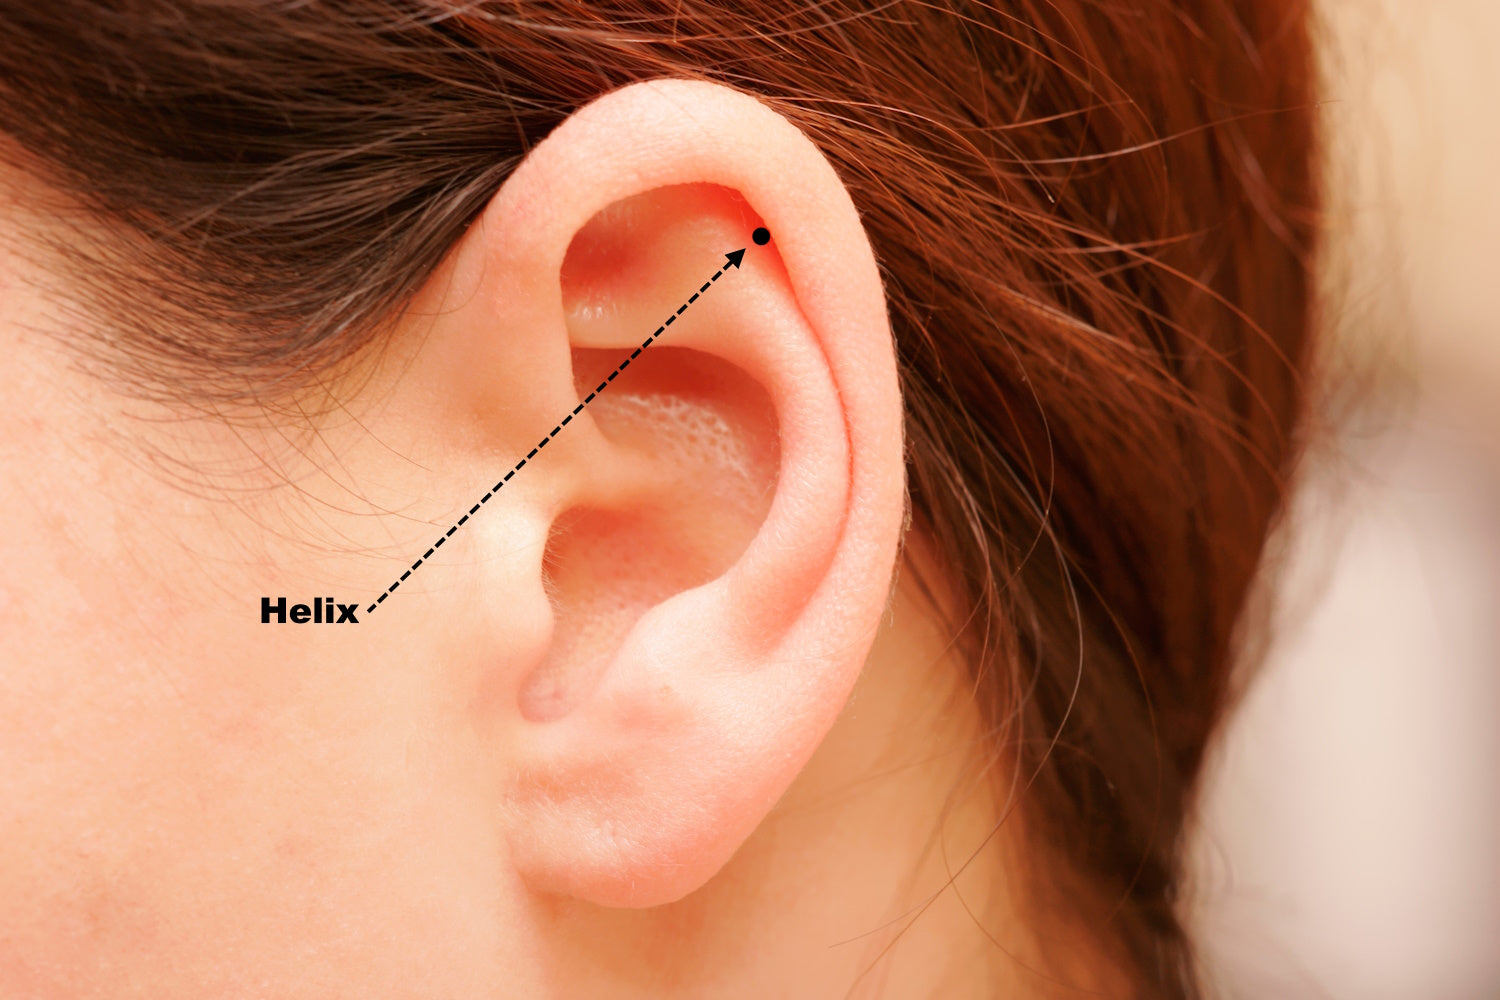 Ear piercings - 14 piercing types and how painful they are